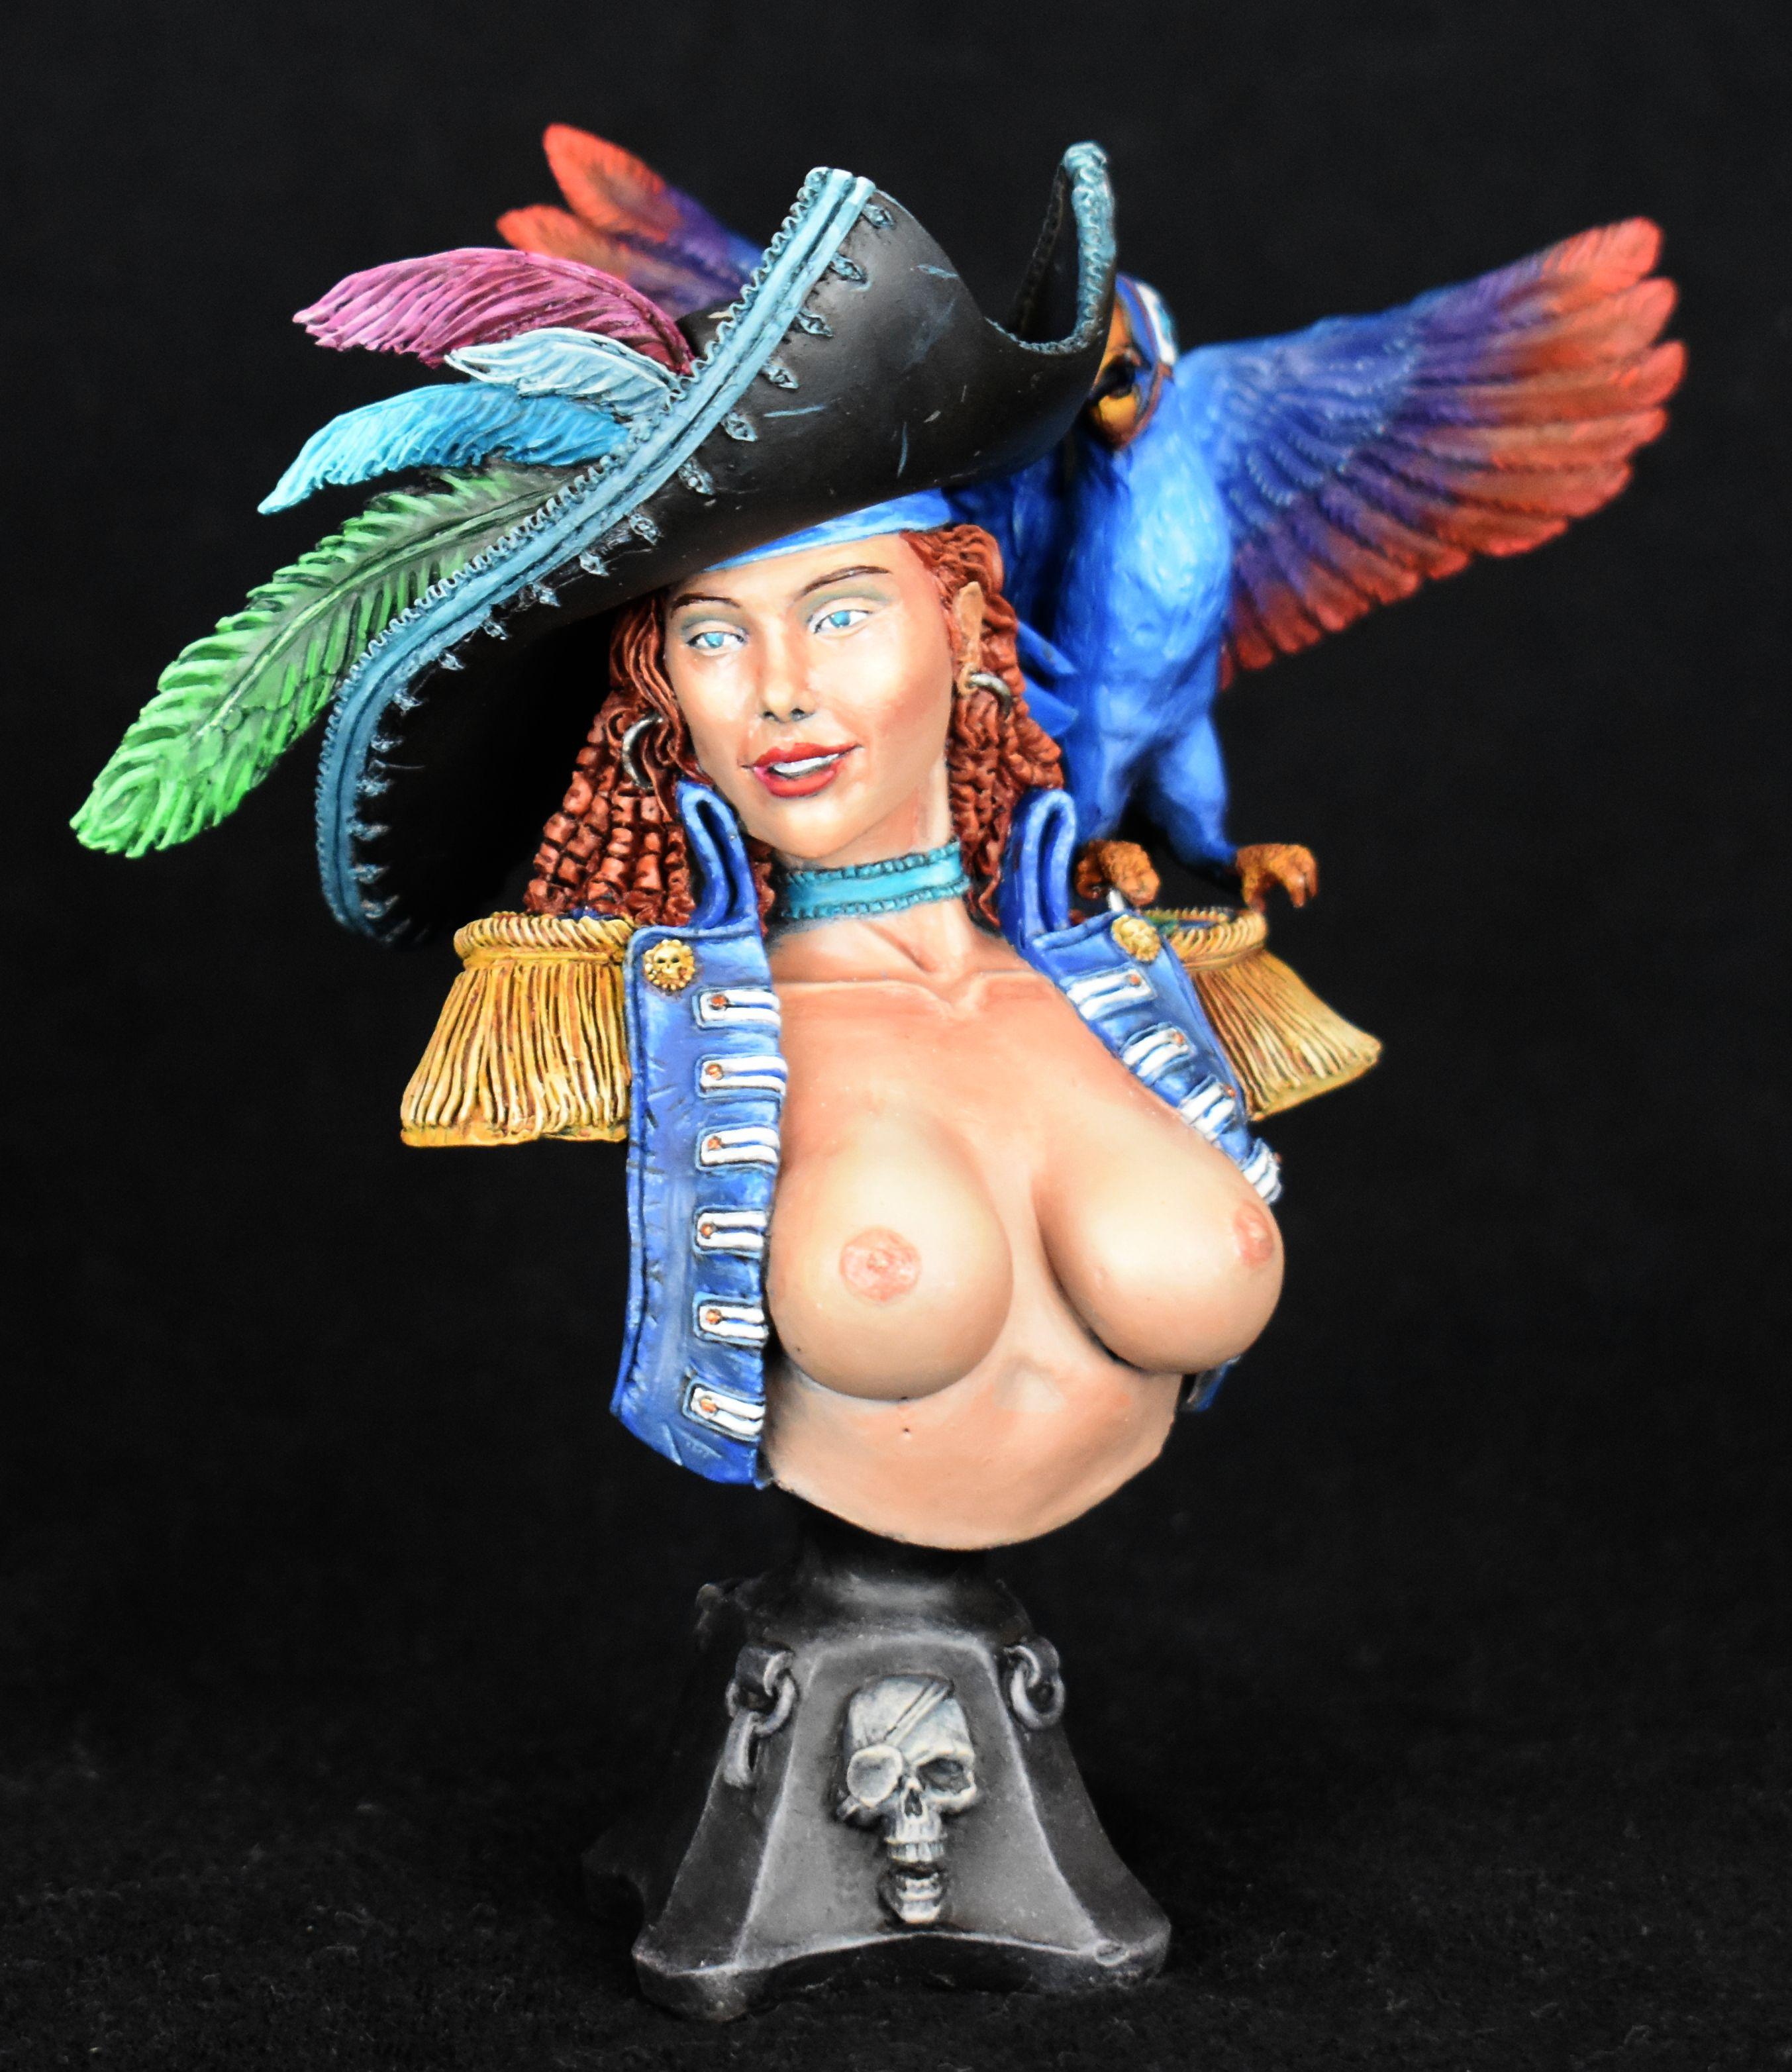 Bust, Busts, Colour, Non-Metallic Metal, Nsfw, Pirate